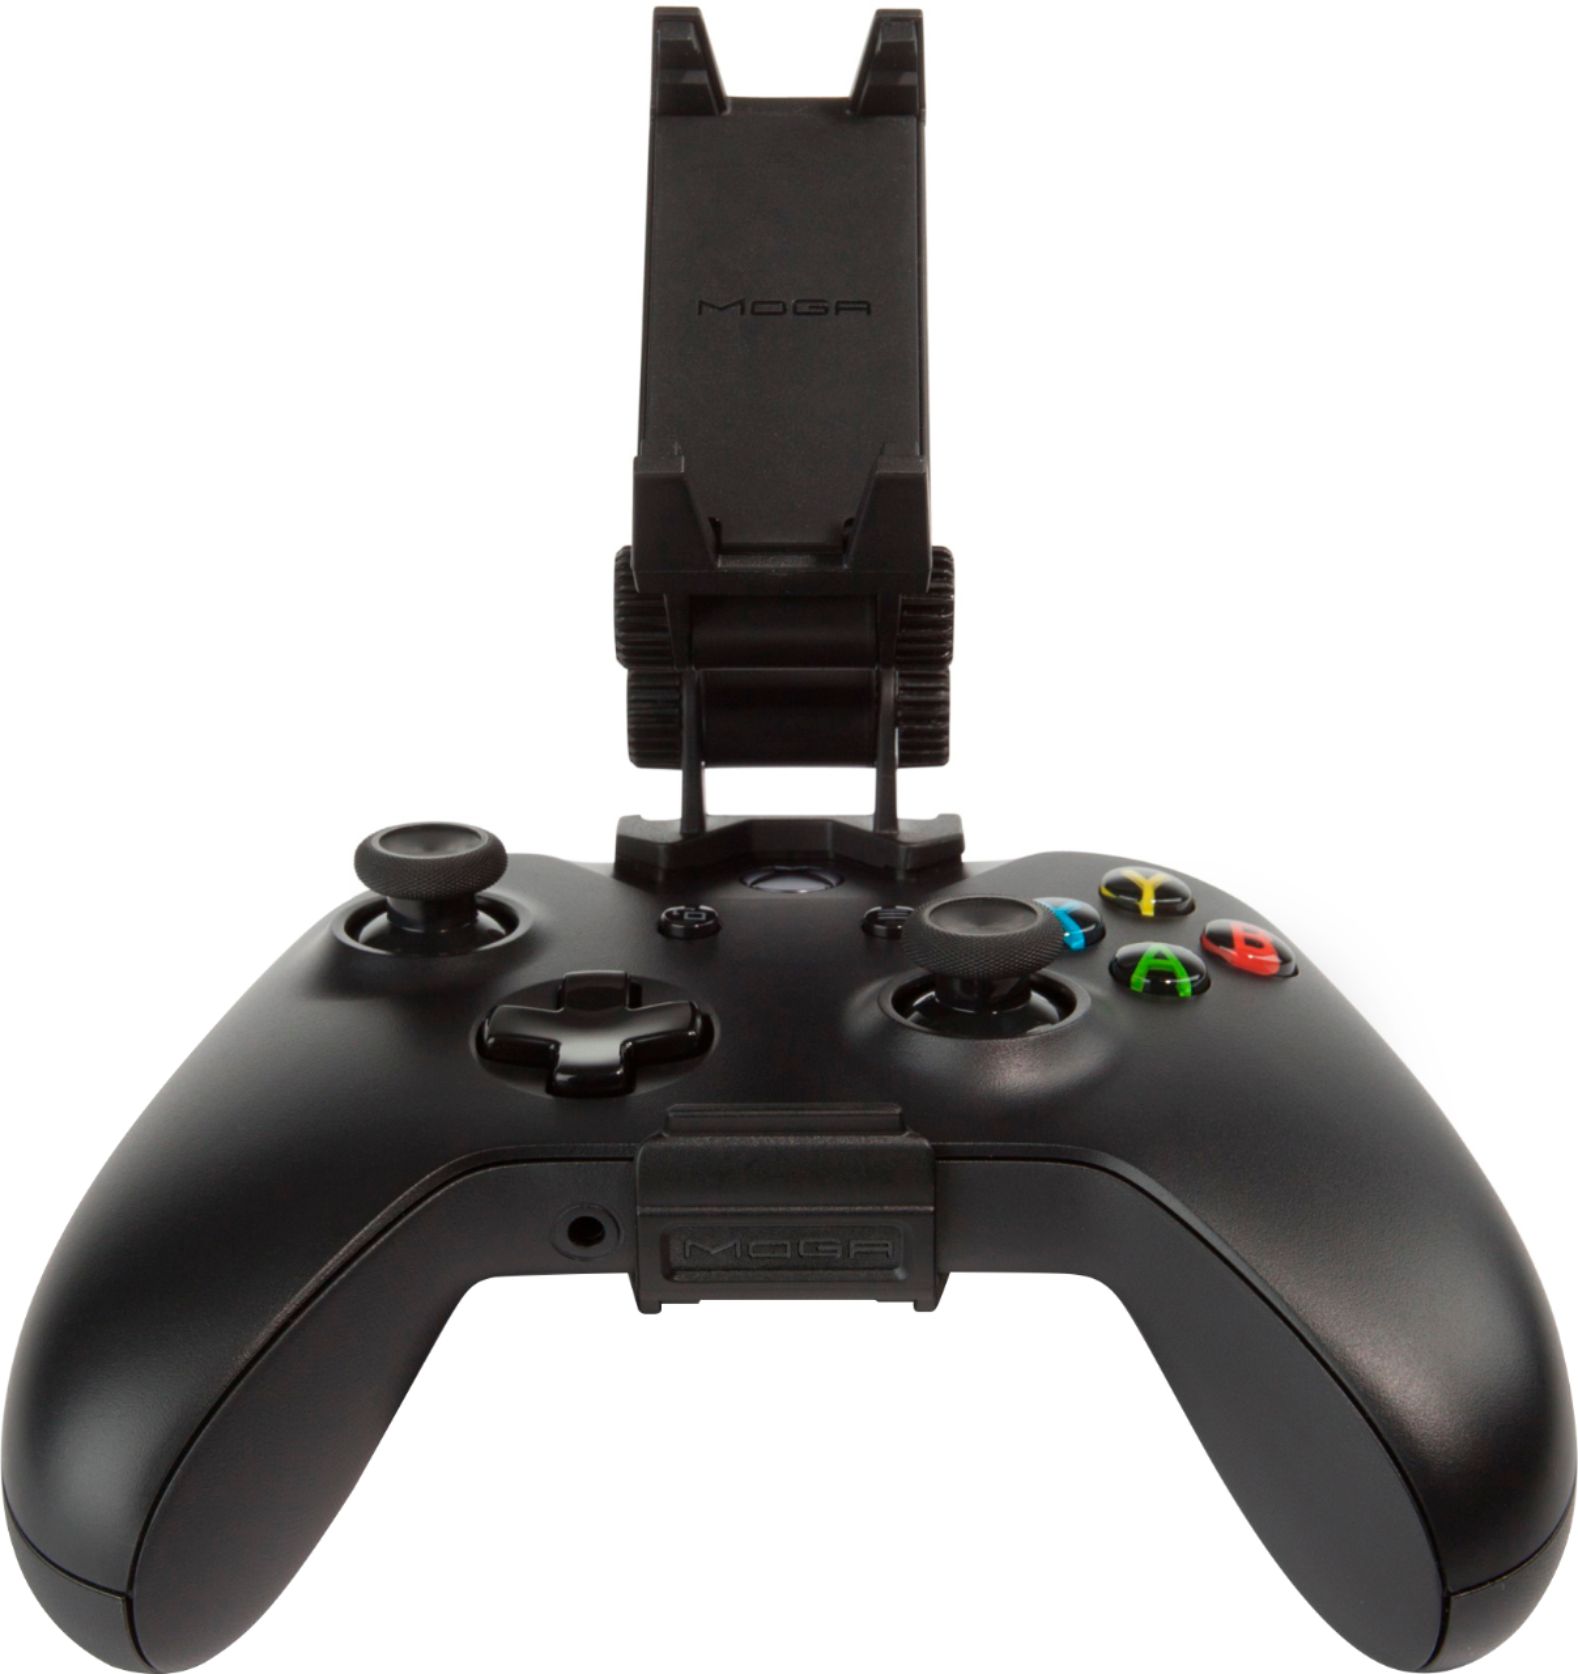 powera moga mobile gaming clip for xbox wireless controllers